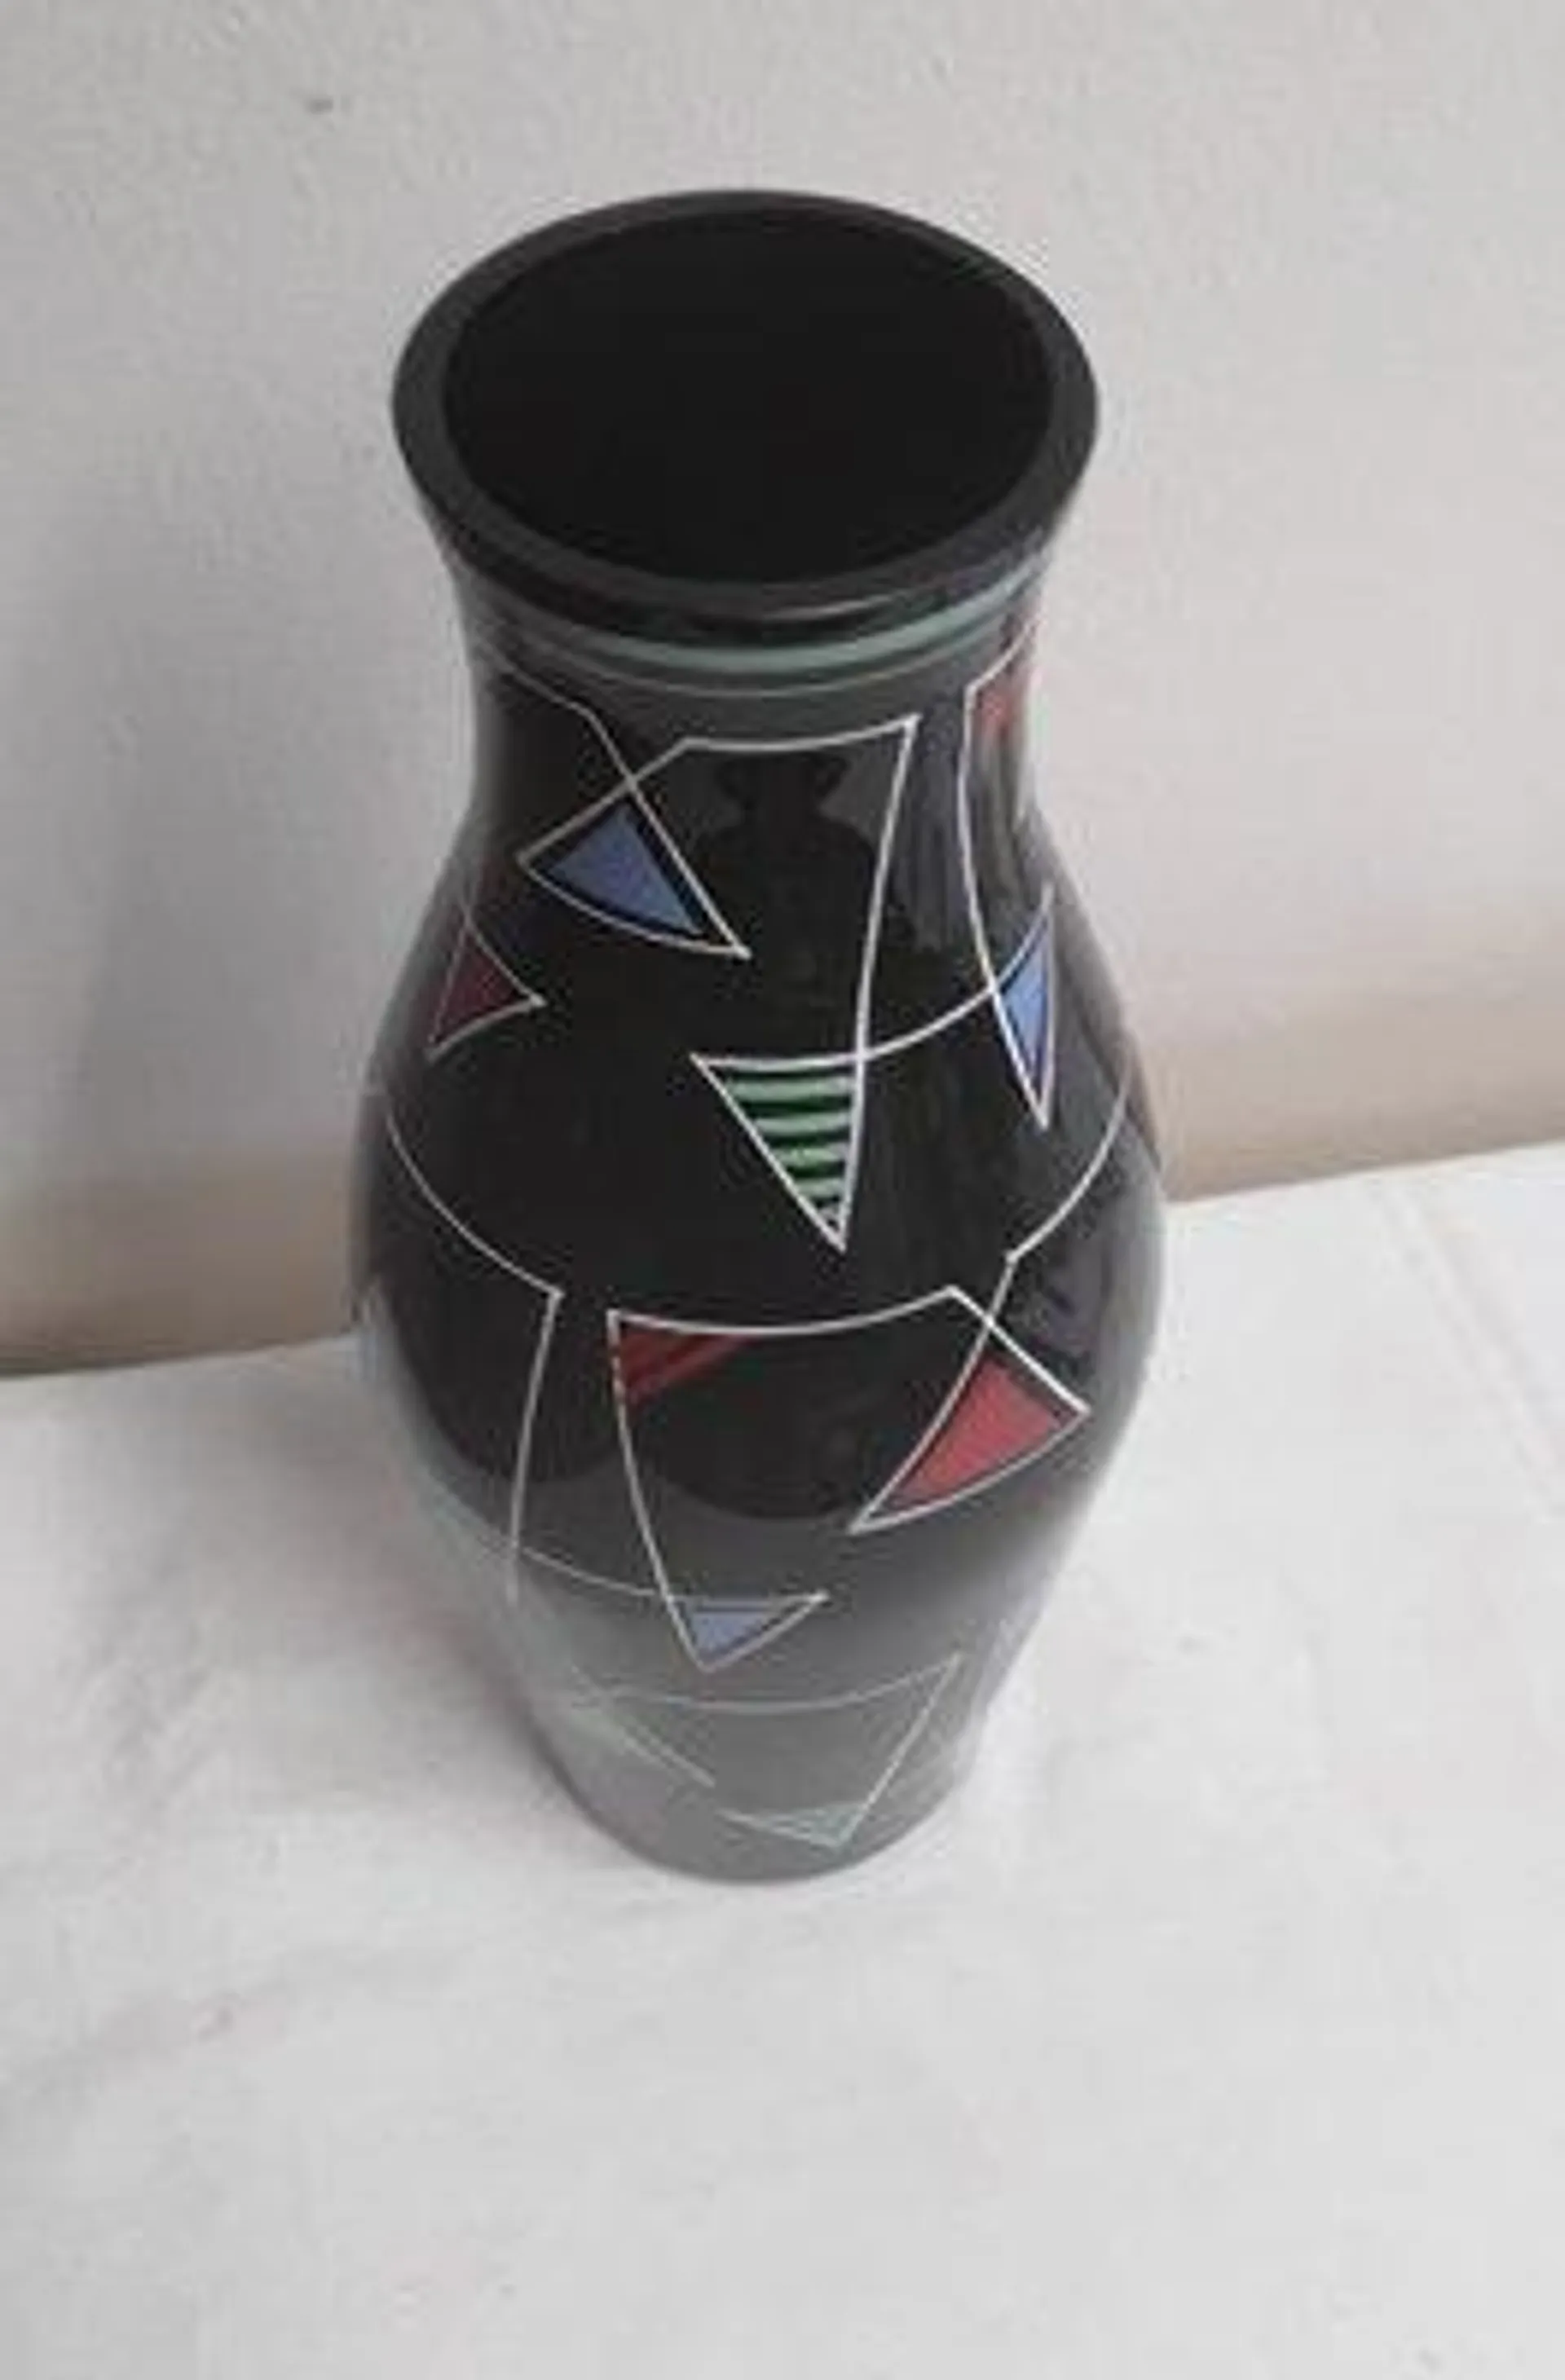 Mid-Century Black Glass Vase with Hand-Painted Geometric Colored Decor by Veb Kunstglas Wasungen, 1960s